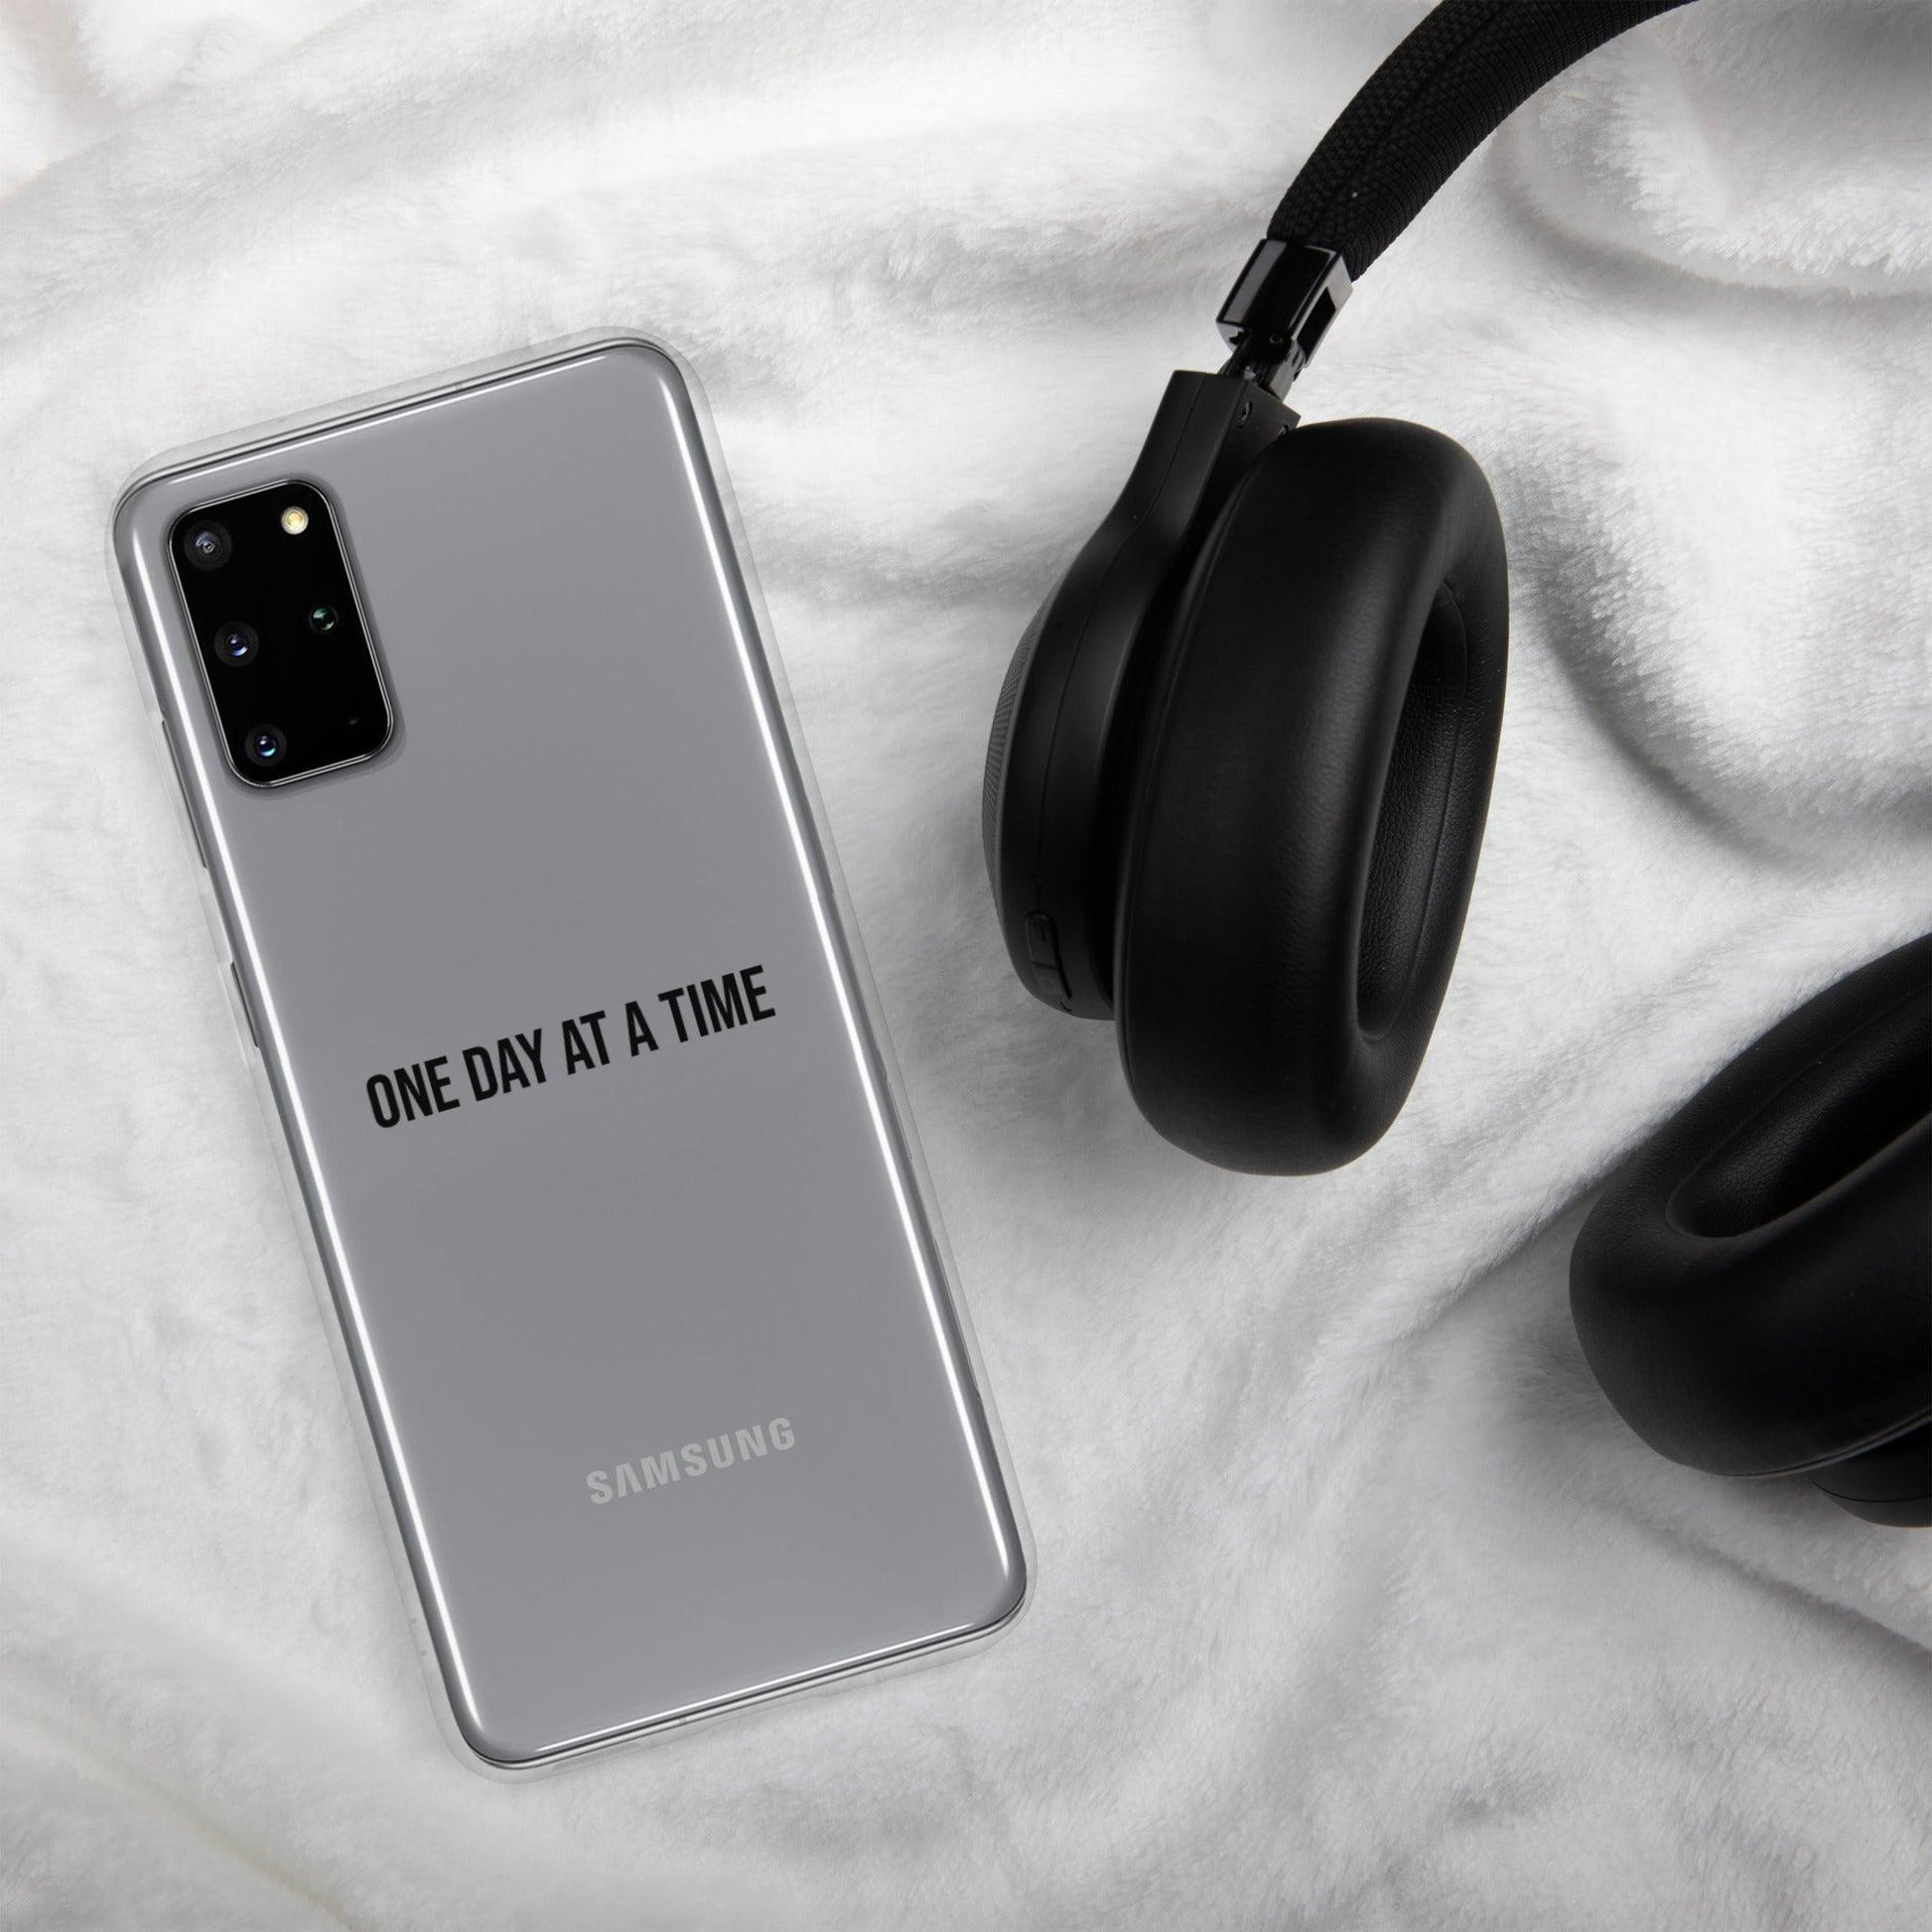 Samsung Case "One day at a time" - Clean & Sober